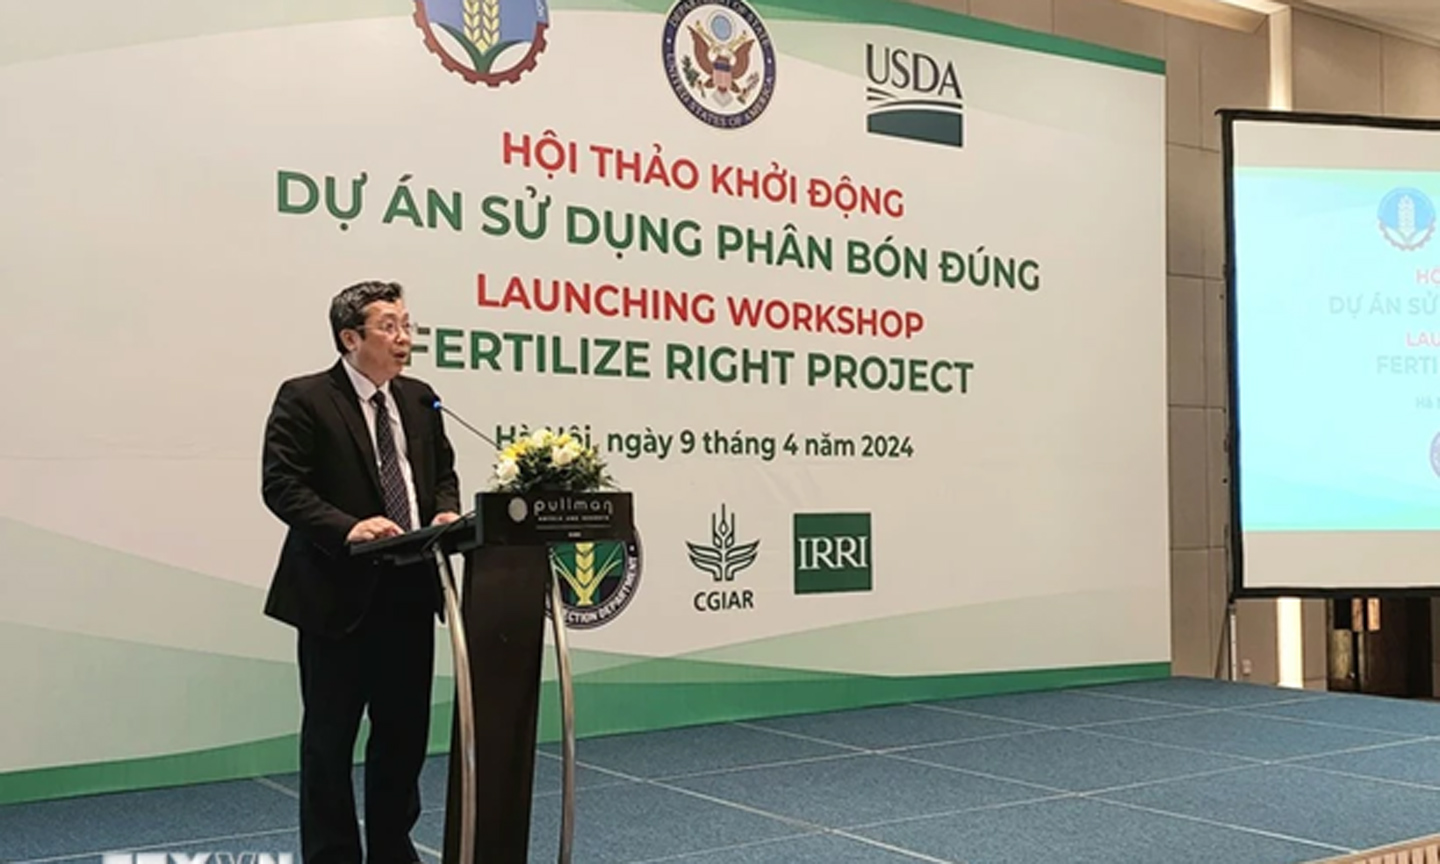 ABO/NDO- The Ministry of Agriculture and Rural Development and the United States Department of Agriculture (USDA) officially launched the Fertilize Right Project, at a workshop in Hanoi on April 9.